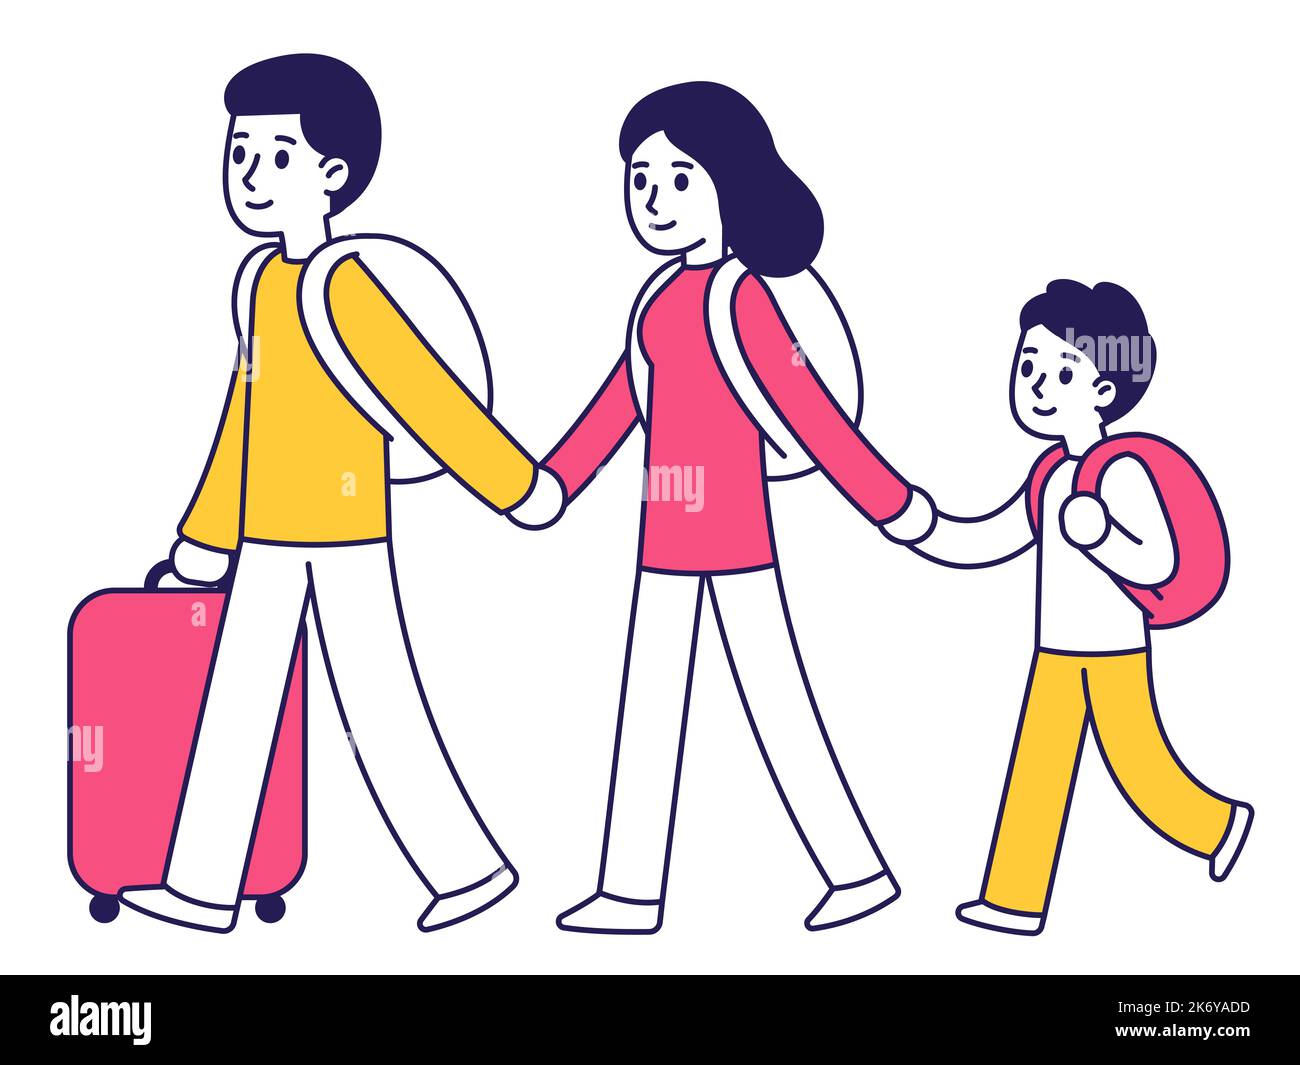 Cartoon family traveling, two parents and child with backpacks and suitcase. Immigration vector illustration, modern stylized flat style. Stock Vector